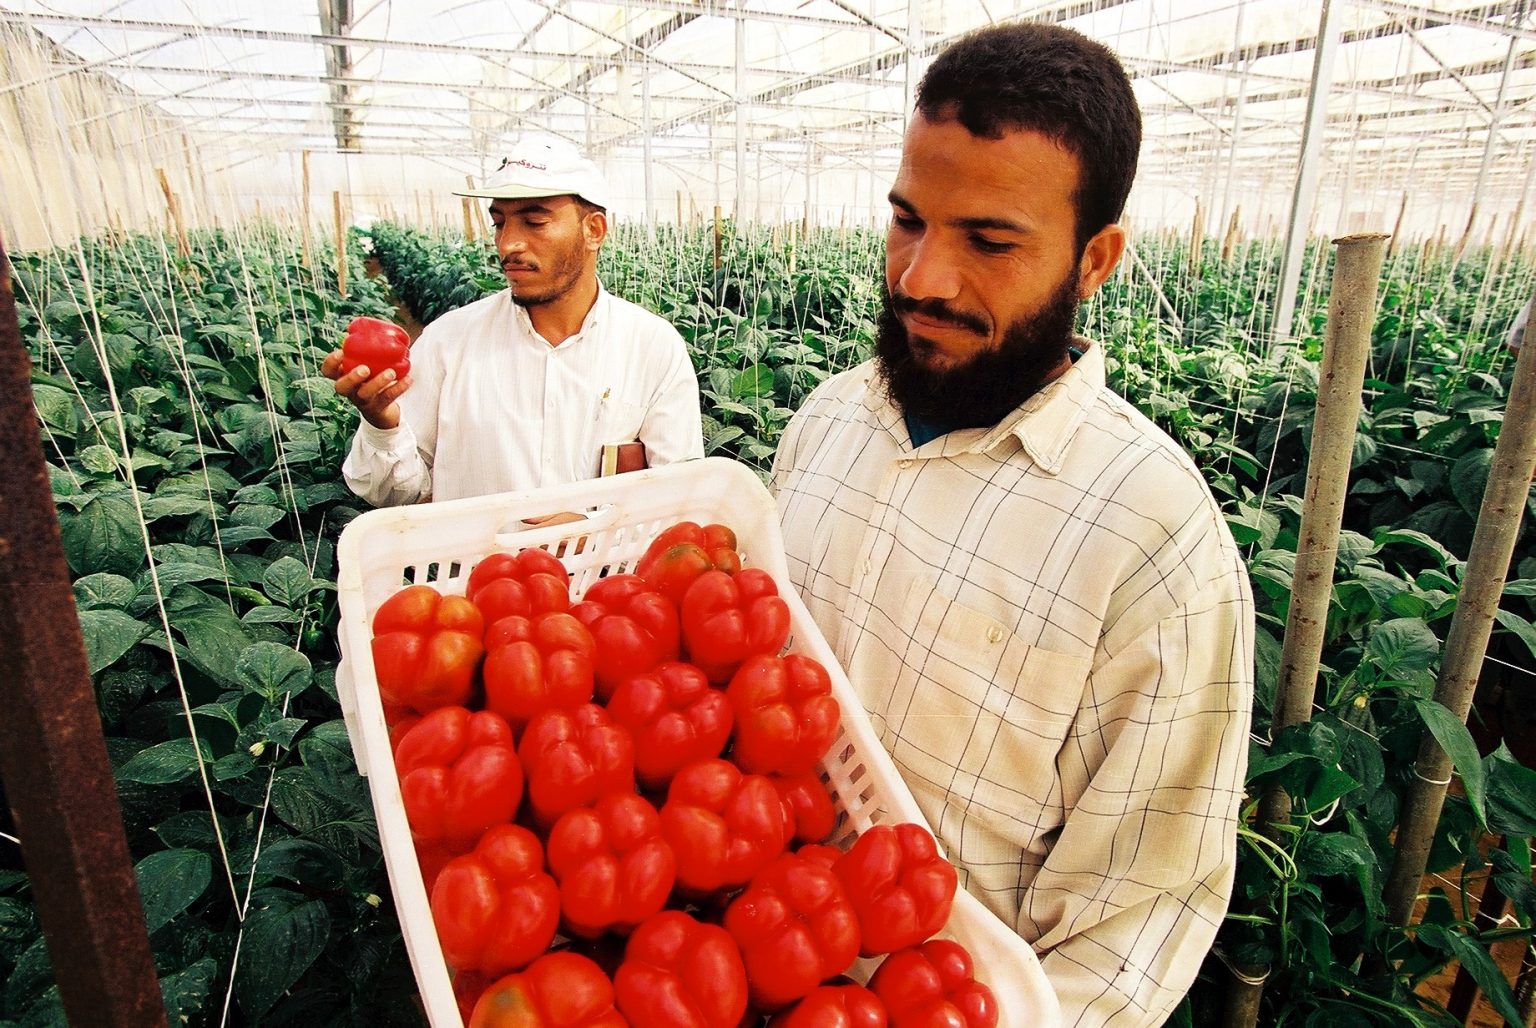 Italy funds agri-business development in Egypt and Iran